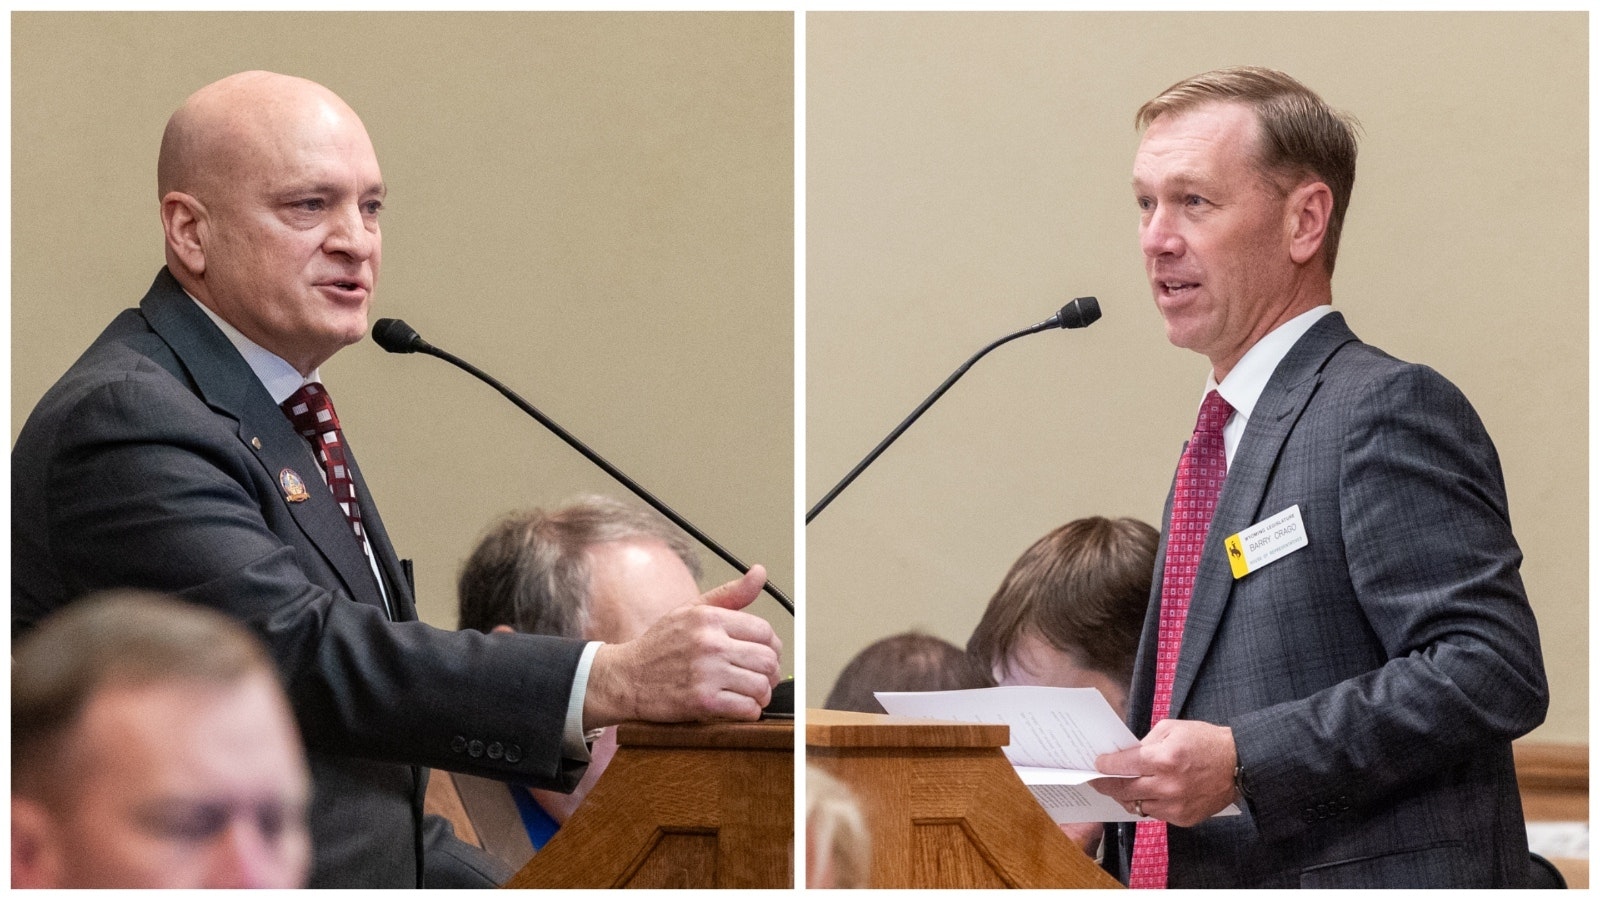 State Rep. John Bear, R-Gillette, left, is chairman of the Wyoming Freedom Caucus, while Rep. Barry Crago, R-Buffalo, right, is part of the Wyoming Caucus.